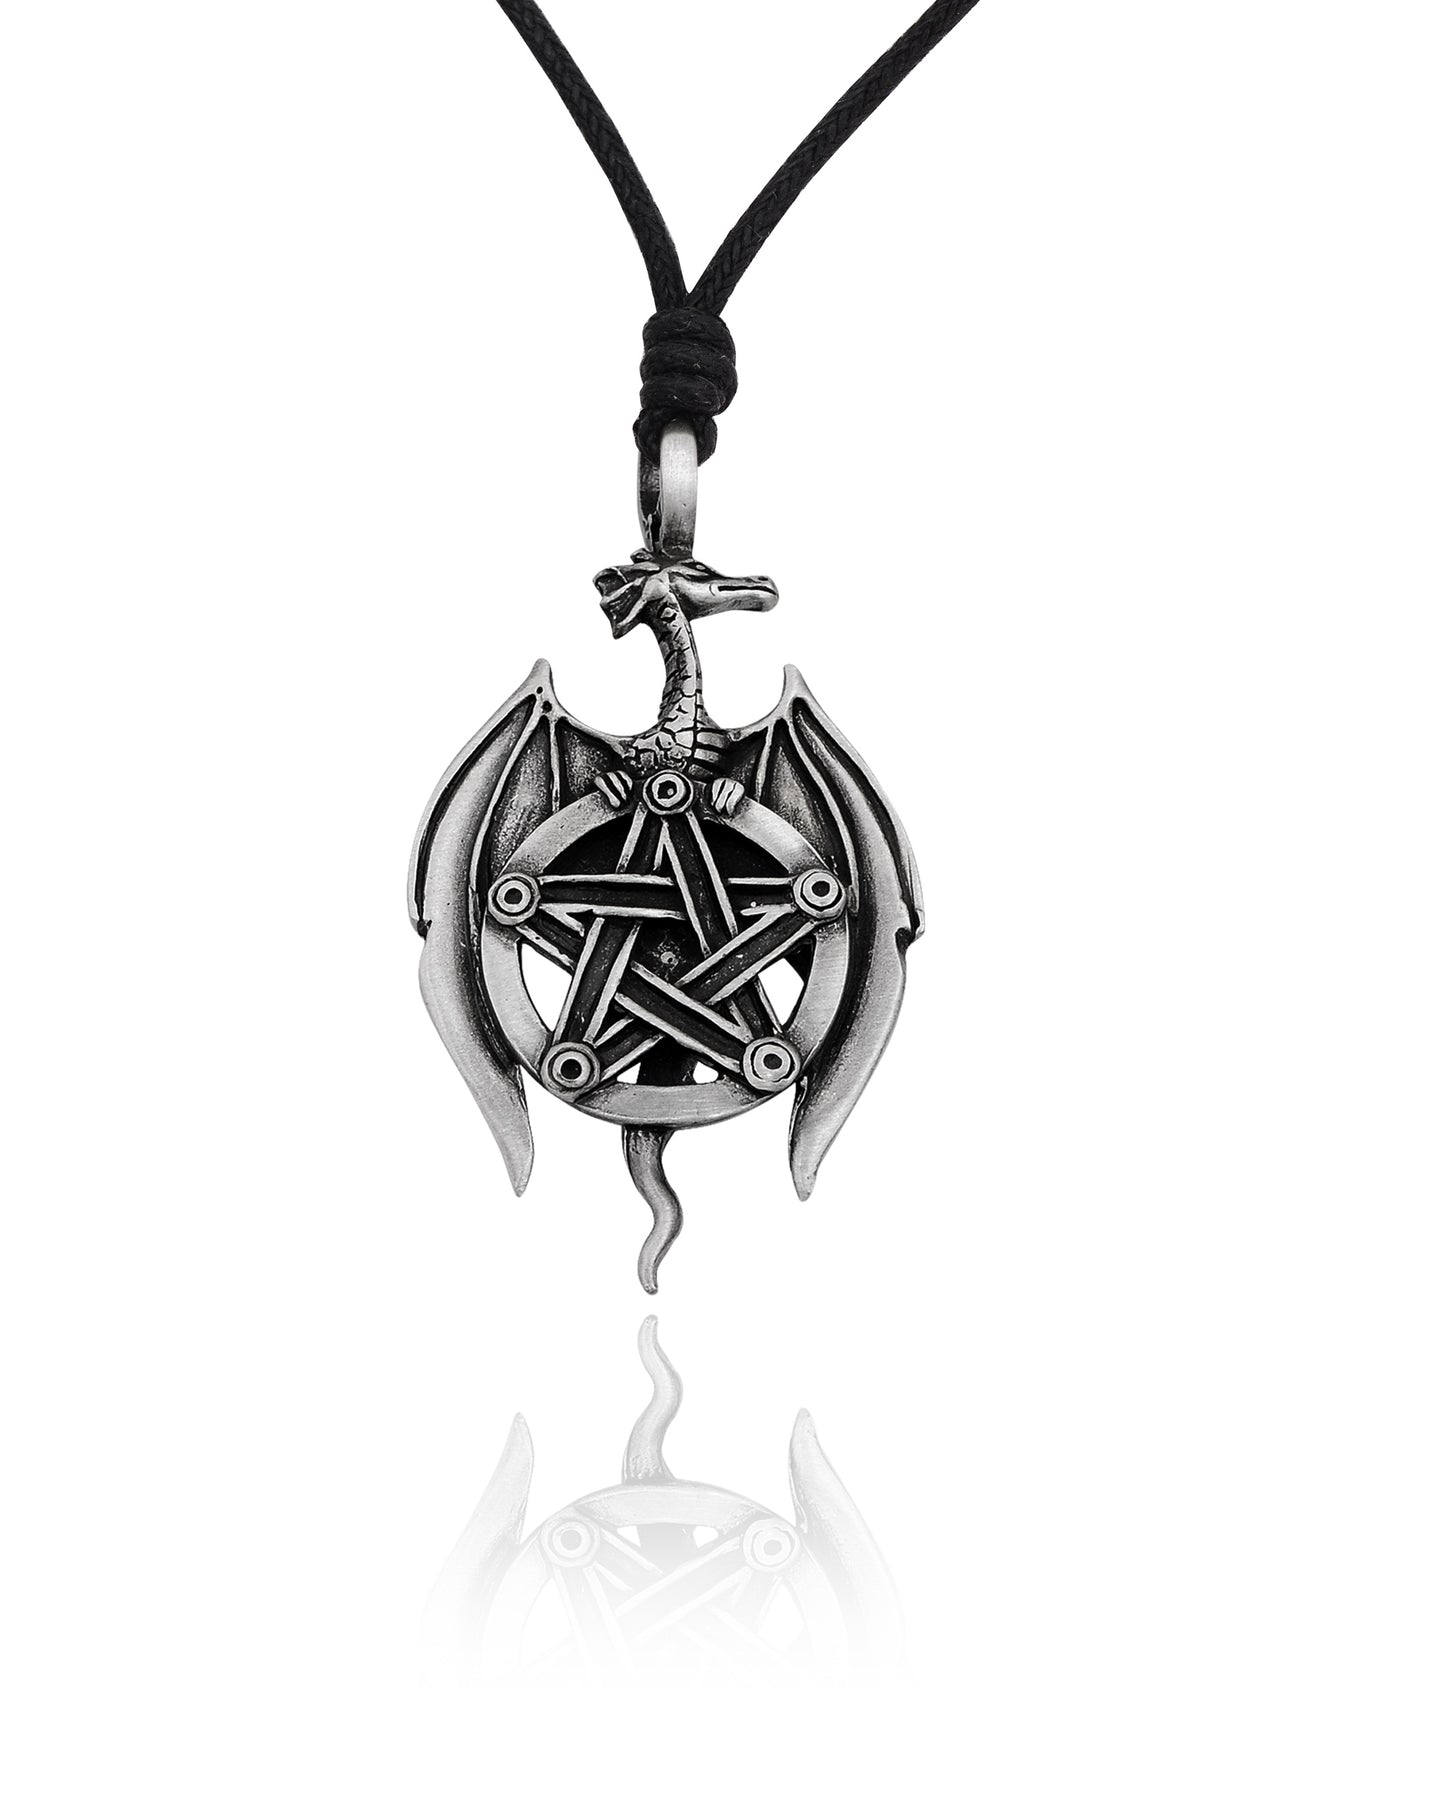 Dragon Pentagram Silver Pewter Charm Necklace Pendant Jewelry With Cotton Cord